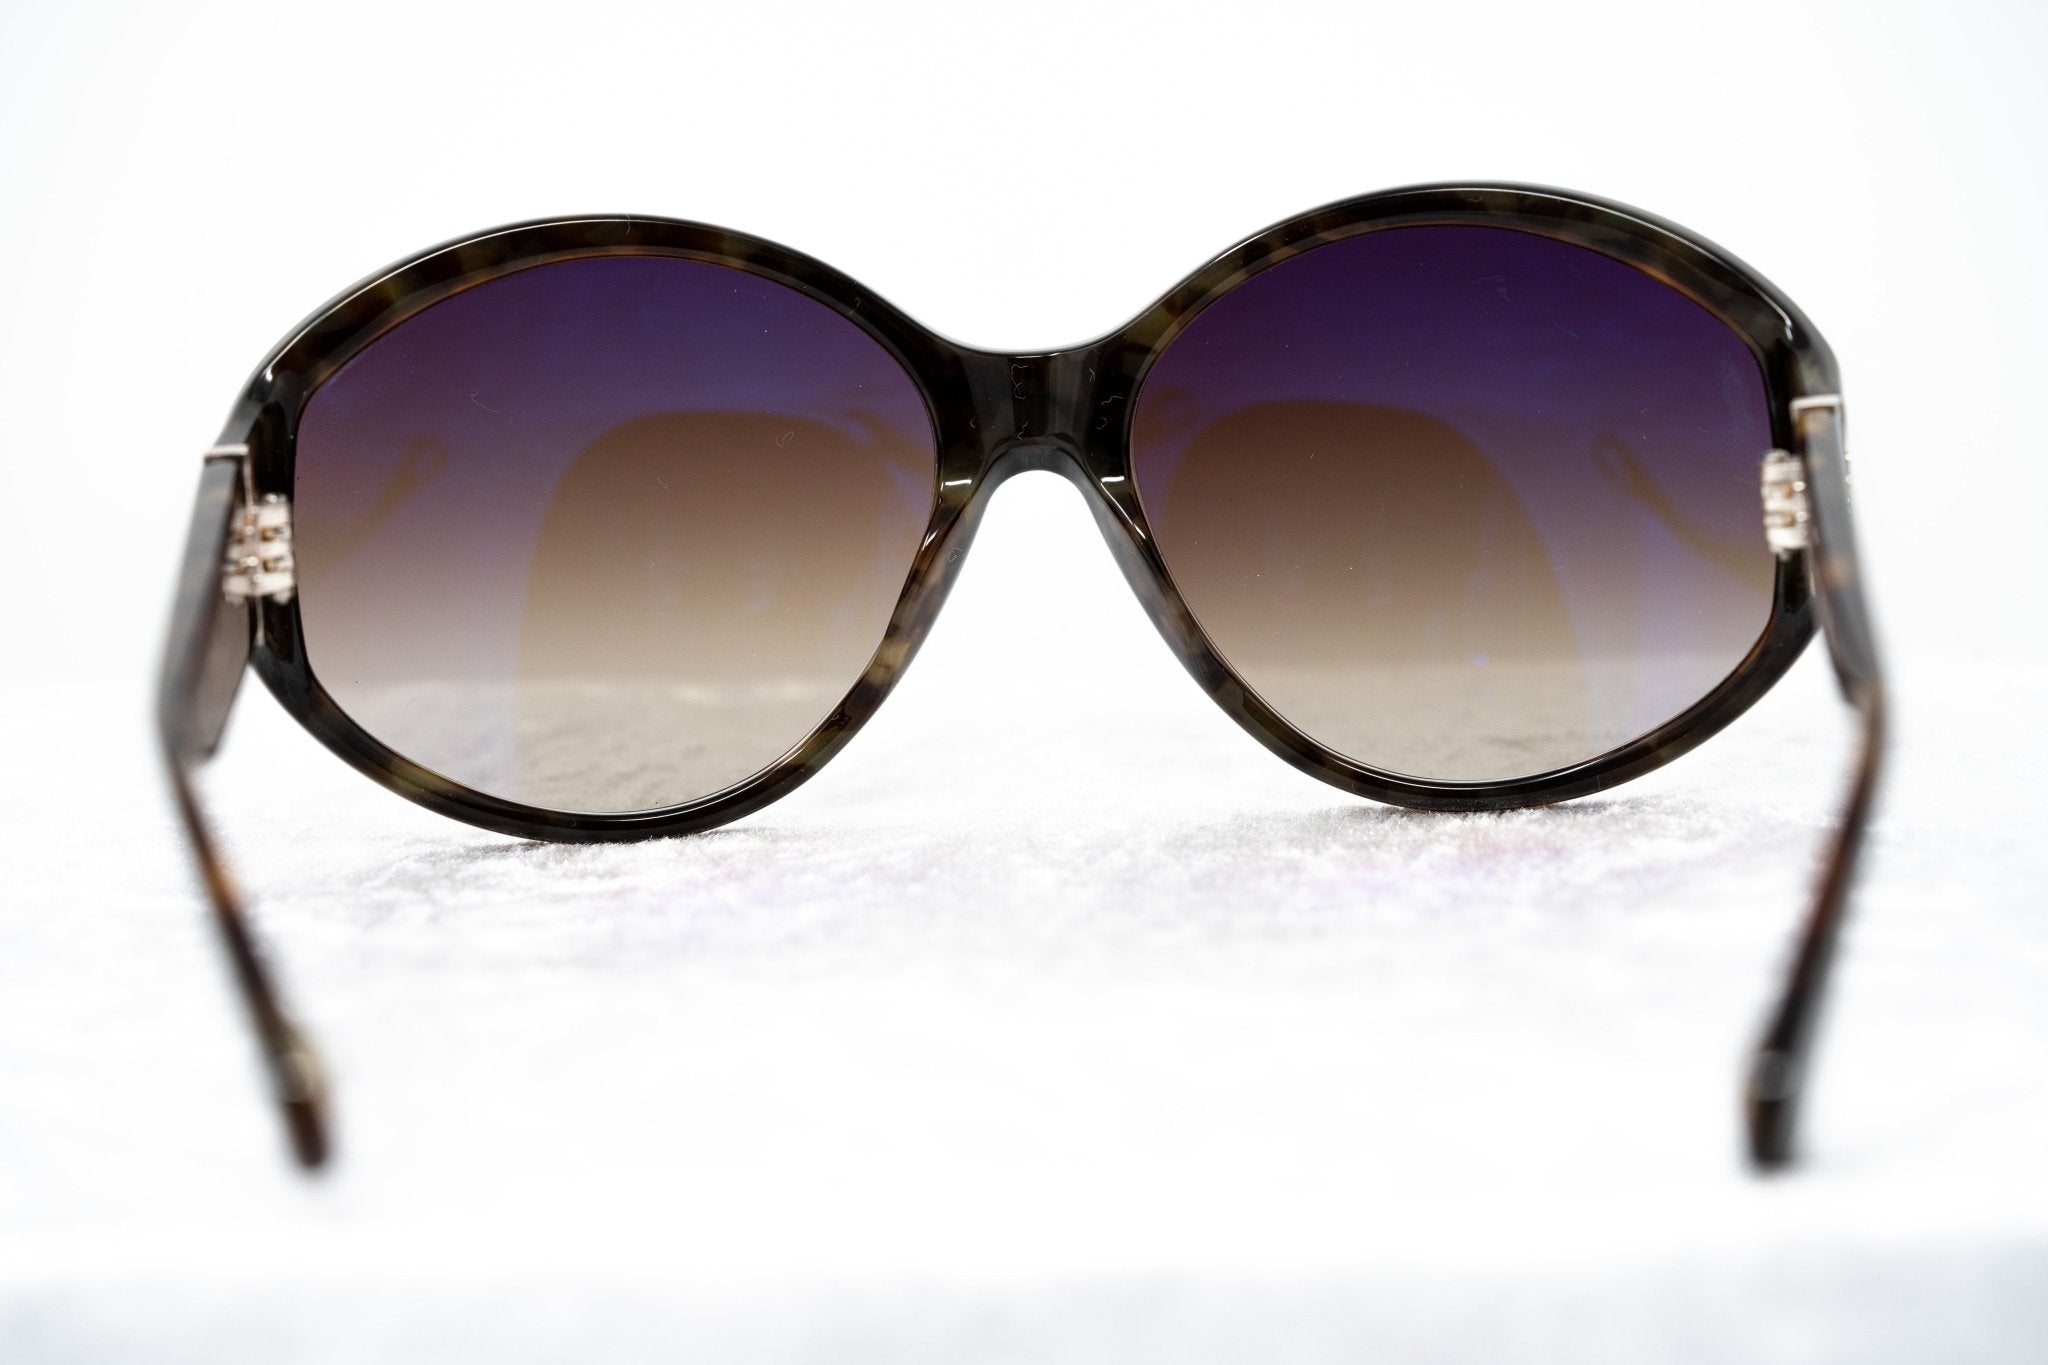 Ann Demeulemeester Sunglasses Oversized Black Tortoise Shell 925 Silver with Brown Graduated Lenses AD6C6SUN - Watches & Crystals